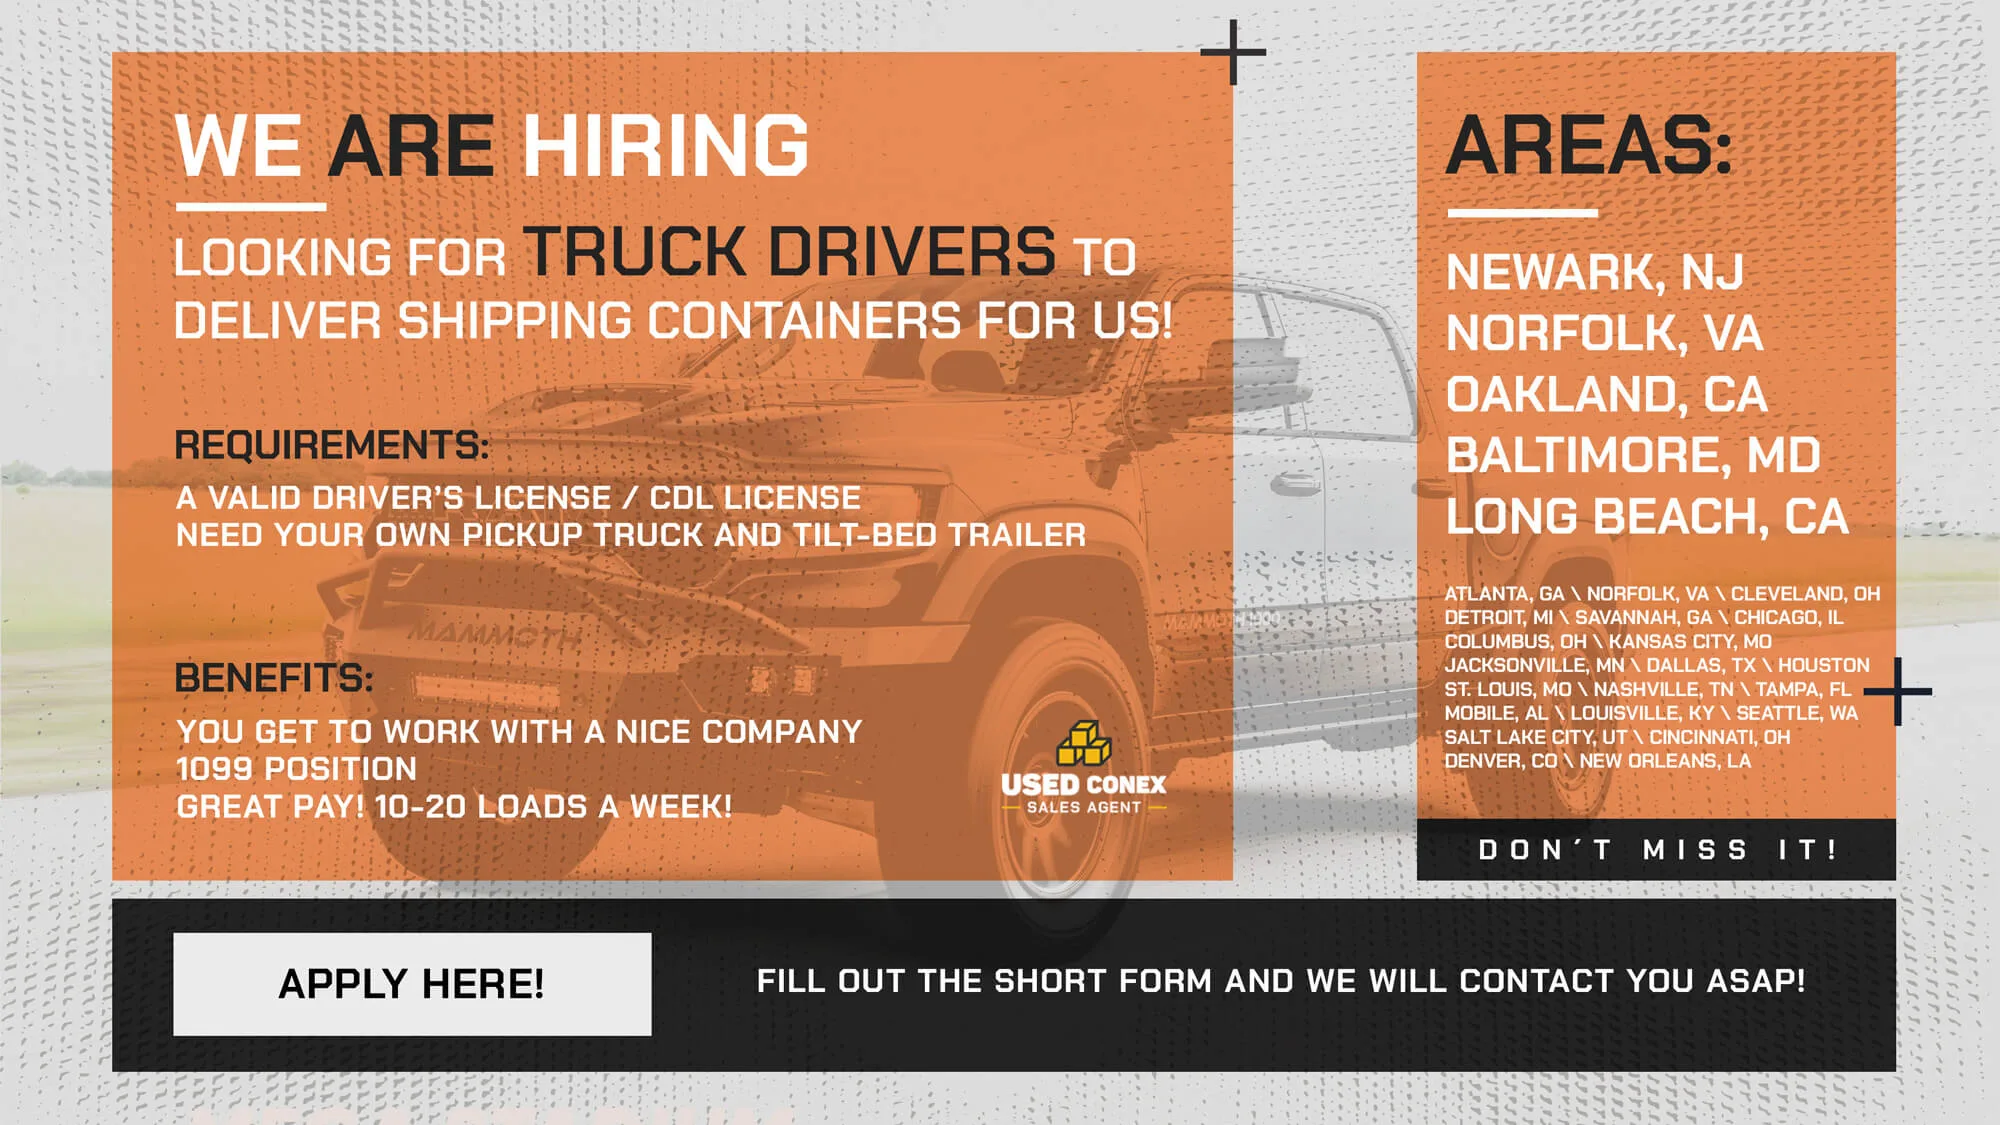 Hiring ASAP! Looking for drivers.